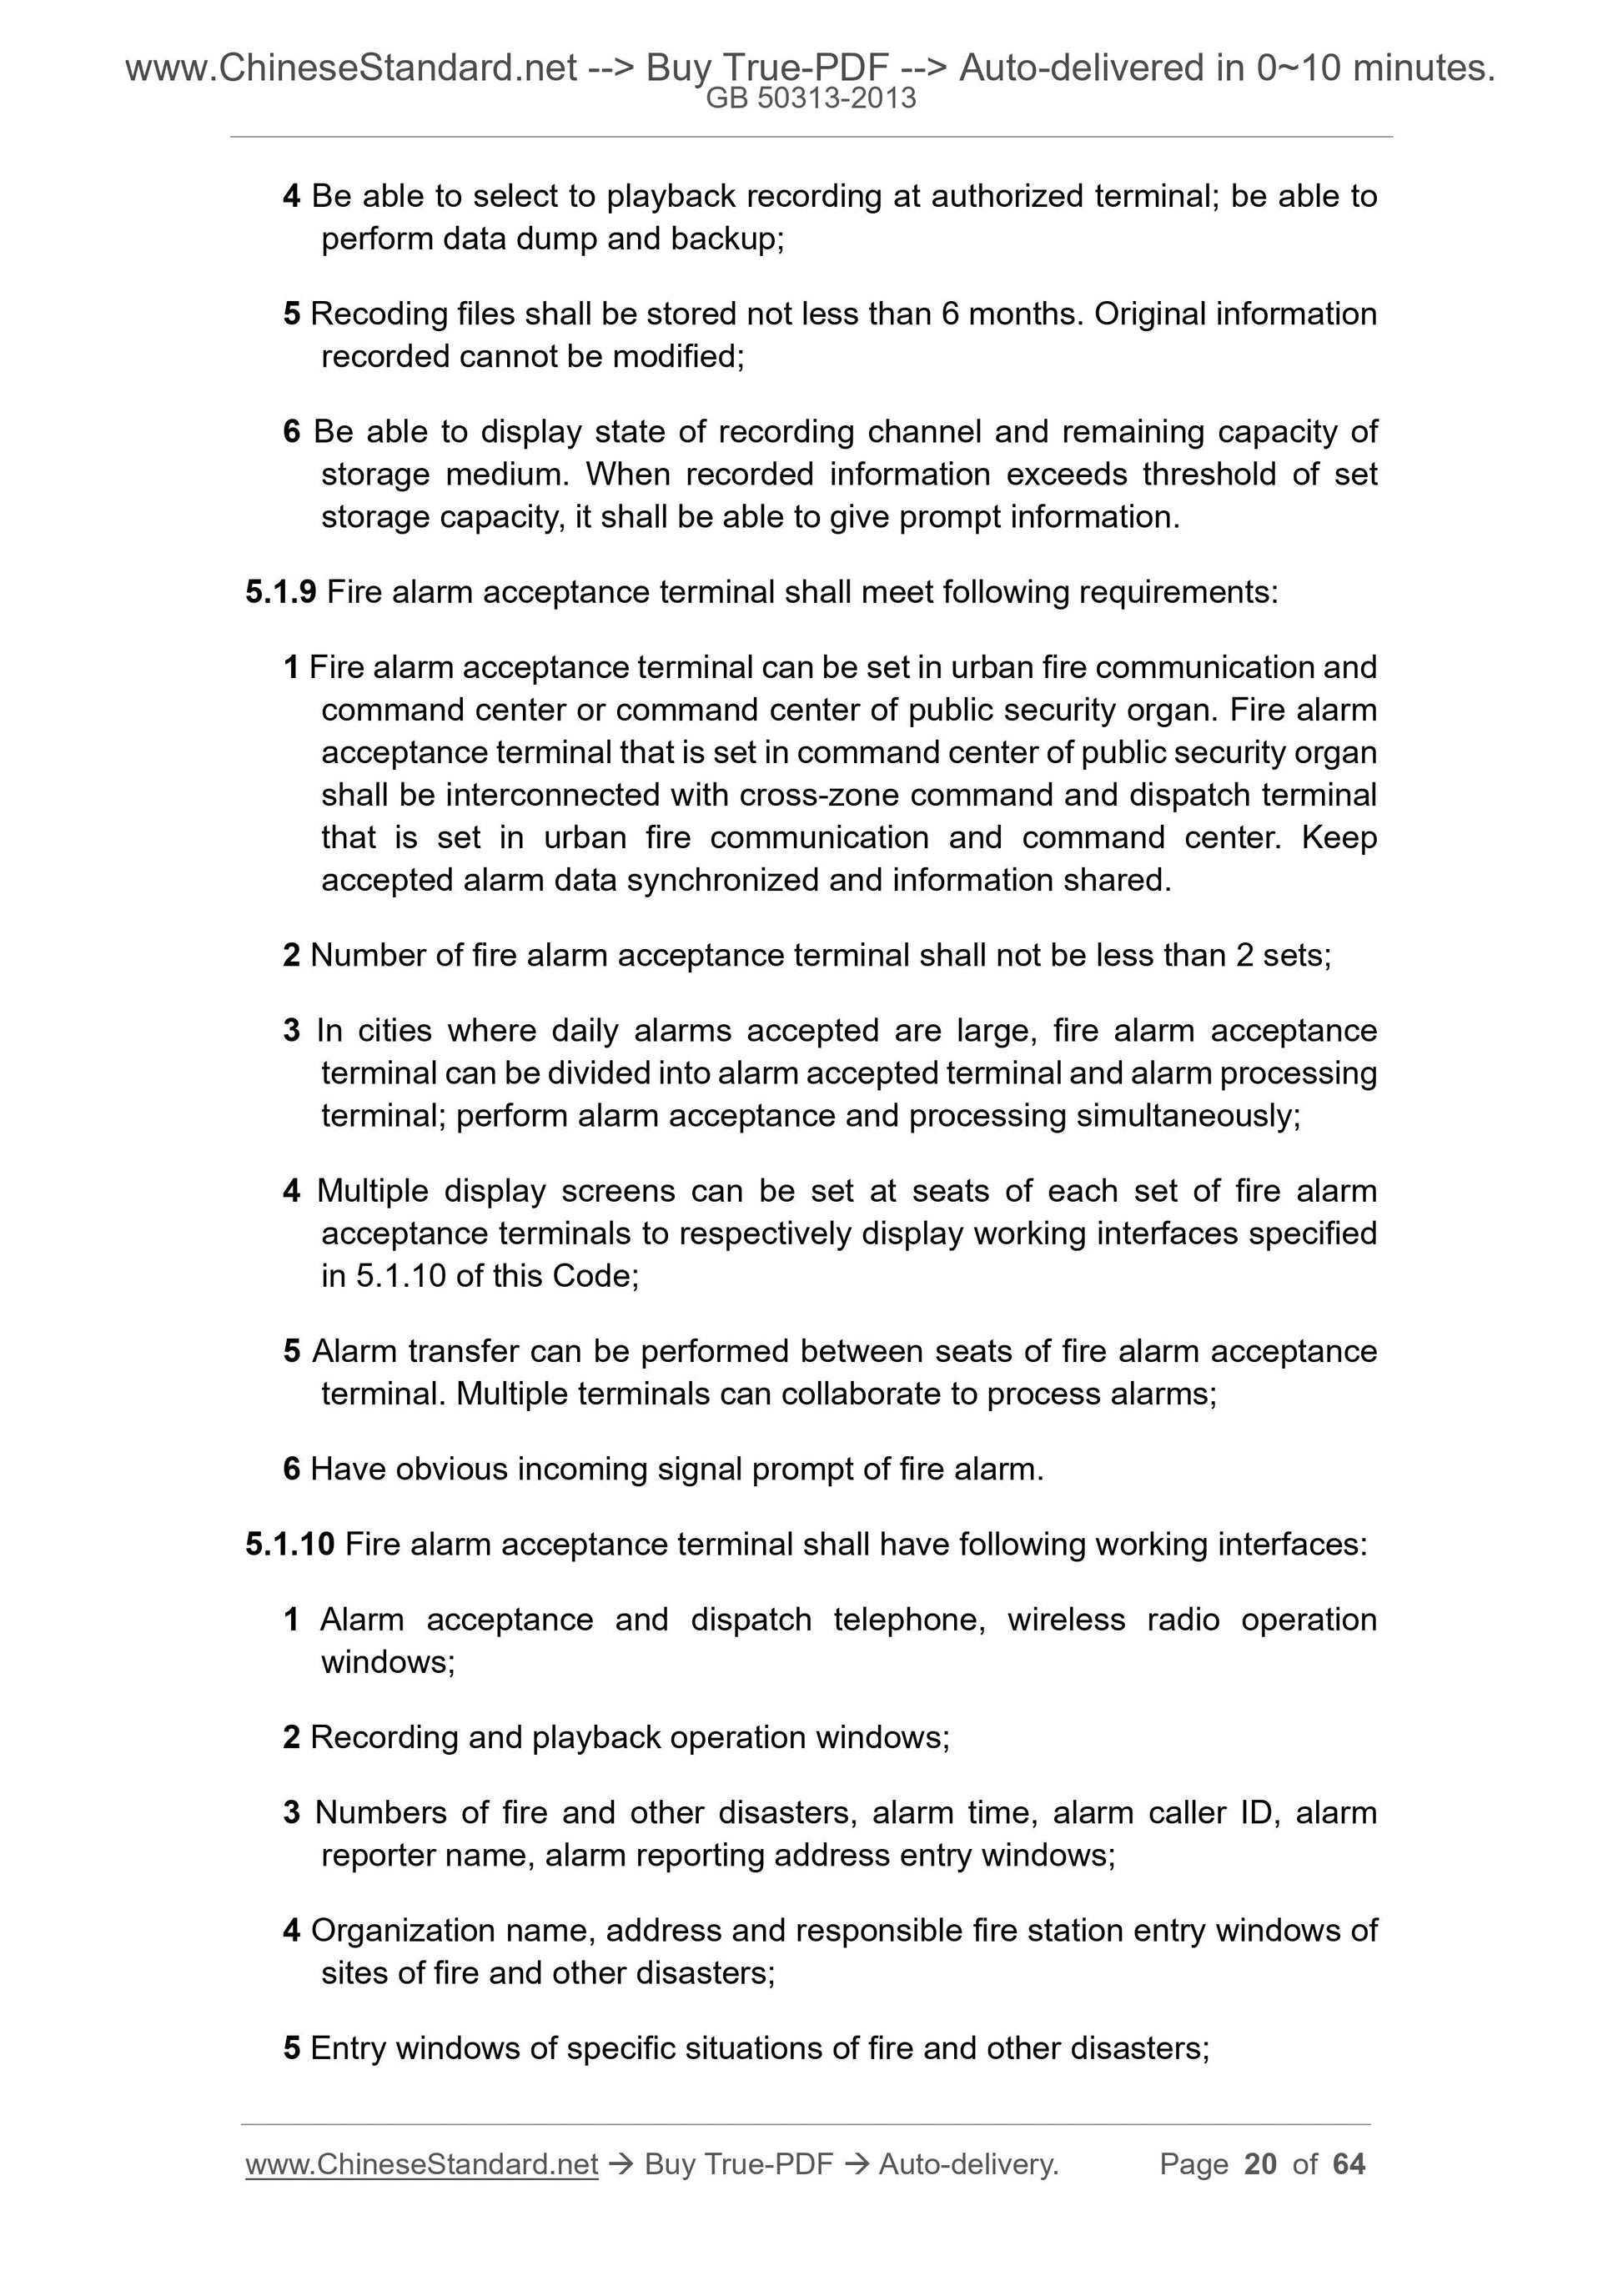 GB 50313-2013 Page 9